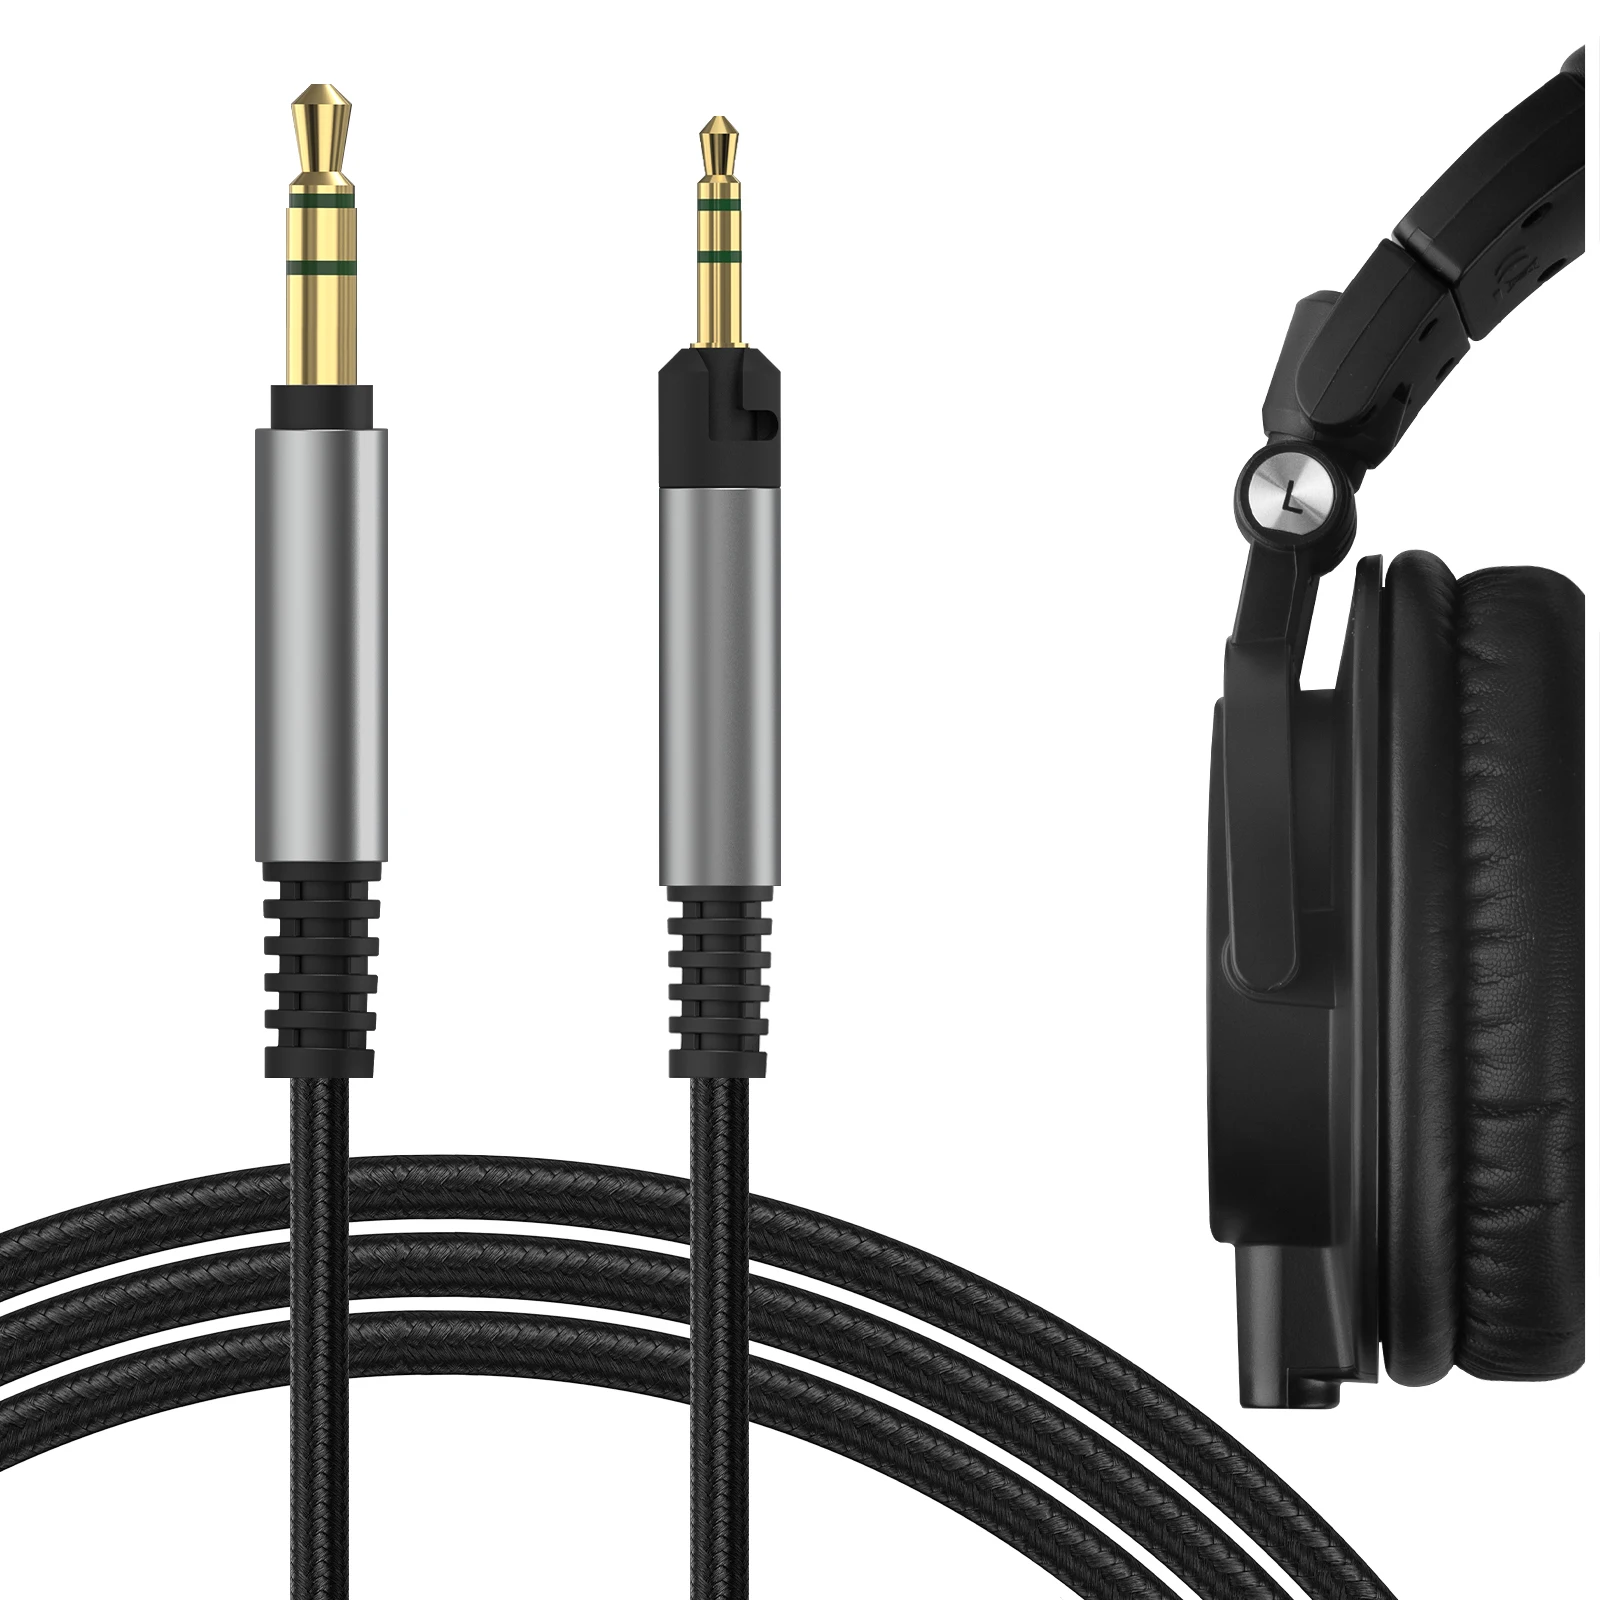 

Geekria QuickFit Audio Cable Compatible with Audio-Technica ATH-M50x, ATH-M40x, ATH-M50, ATH-M60x, ATH-M40, ATH-M70x(4 ft/1.2 m)